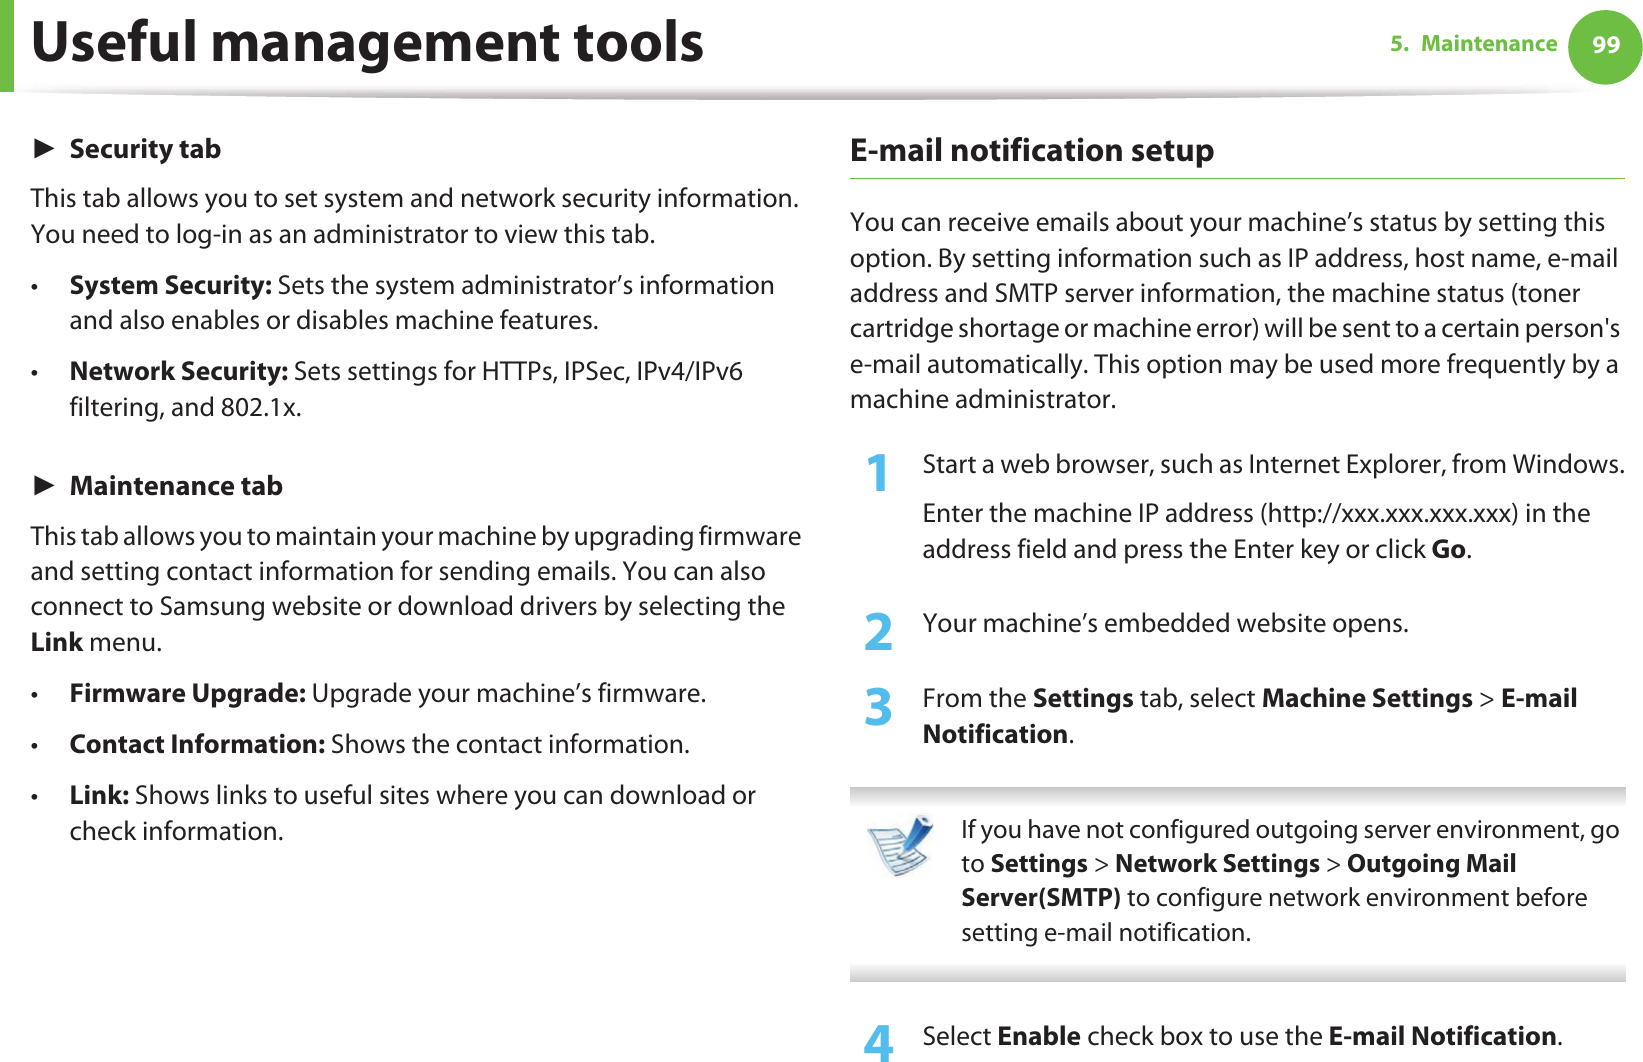 Useful management tools 995. MaintenanceŹSecurity tabThis tab allows you to set system and network security information. You need to log-in as an administrator to view this tab.•System Security: Sets the system administrator’s information and also enables or disables machine features.•Network Security: Sets settings for HTTPs, IPSec, IPv4/IPv6 filtering, and 802.1x.ŹMaintenance tabThis tab allows you to maintain your machine by upgrading firmware and setting contact information for sending emails. You can also connect to Samsung website or download drivers by selecting the Link menu.•Firmware Upgrade: Upgrade your machine’s firmware.•Contact Information: Shows the contact information.•Link: Shows links to useful sites where you can download or check information.E-mail notification setupYou can receive emails about your machine’s status by setting this option. By setting information such as IP address, host name, e-mail address and SMTP server information, the machine status (toner cartridge shortage or machine error) will be sent to a certain person&apos;s e-mail automatically. This option may be used more frequently by a machine administrator. 1Start a web browser, such as Internet Explorer, from Windows.Enter the machine IP address (http://xxx.xxx.xxx.xxx) in the address field and press the Enter key or click Go.2  Your machine’s embedded website opens.3  From the Settings tab, select Machine Settings &gt; E-mail Notification.  If you have not configured outgoing server environment, go to Settings &gt; Network Settings &gt; Outgoing Mail Server(SMTP) to configure network environment before setting e-mail notification.  4  Select Enable check box to use the E-mail Notification.